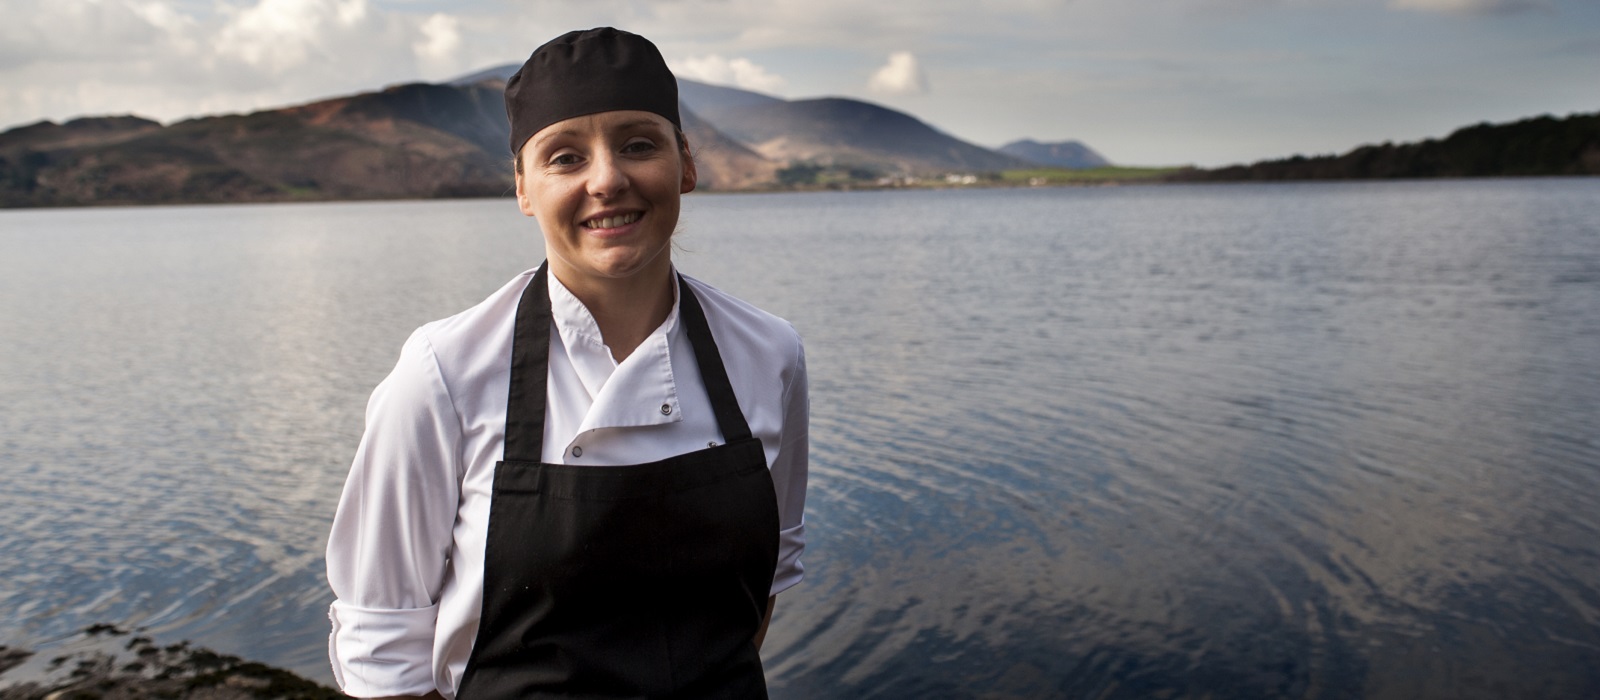 Patricia Teahan - Head Chef at Carrig House